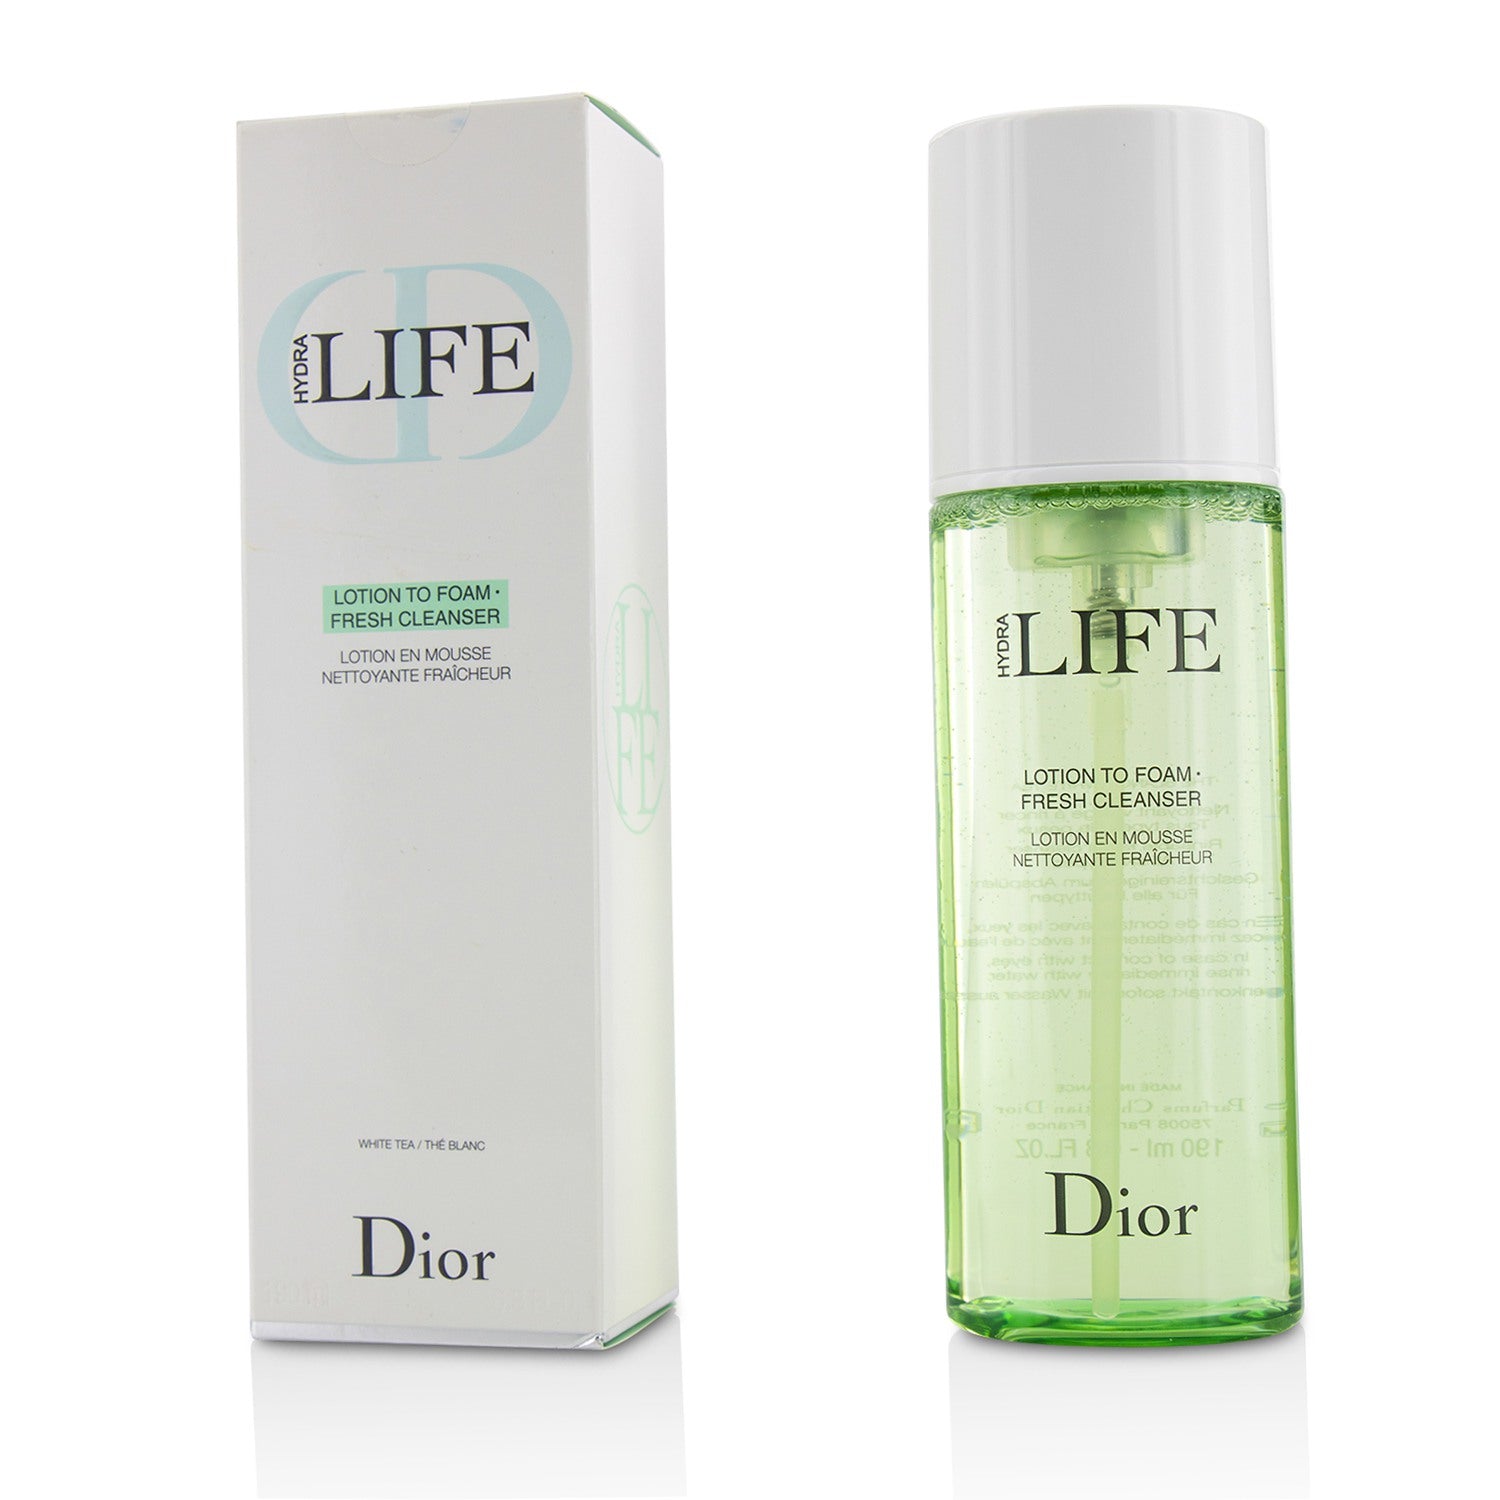 Hydra Life Lotion To Foam - Fresh Cleanser for Sale | Christian Dior, Skincare, Buy Author